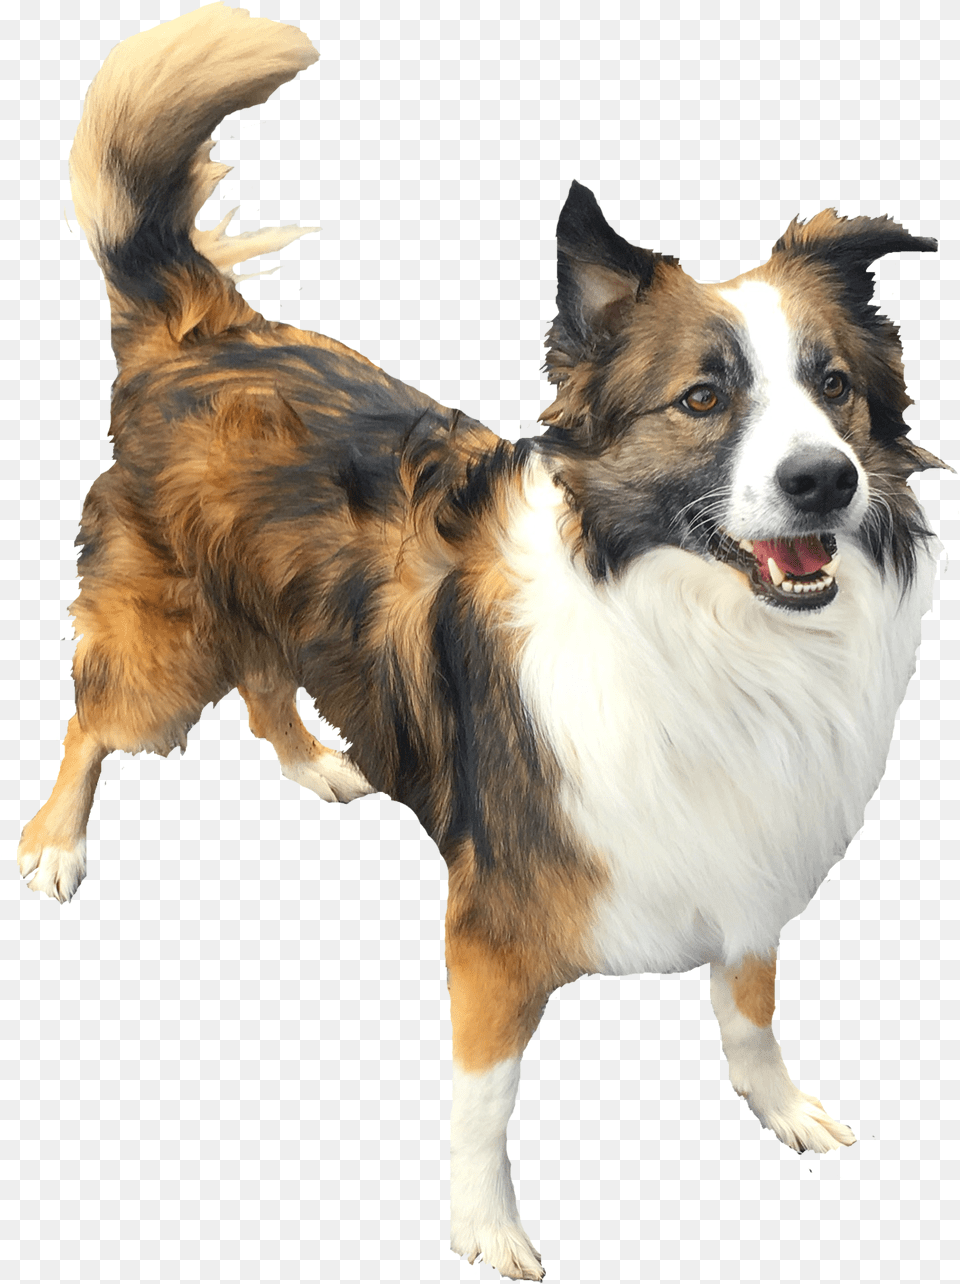 Contact Usclass Lazyload Lazyload Fade Indata Dog Catches Something, Animal, Canine, Collie, Mammal Free Png Download